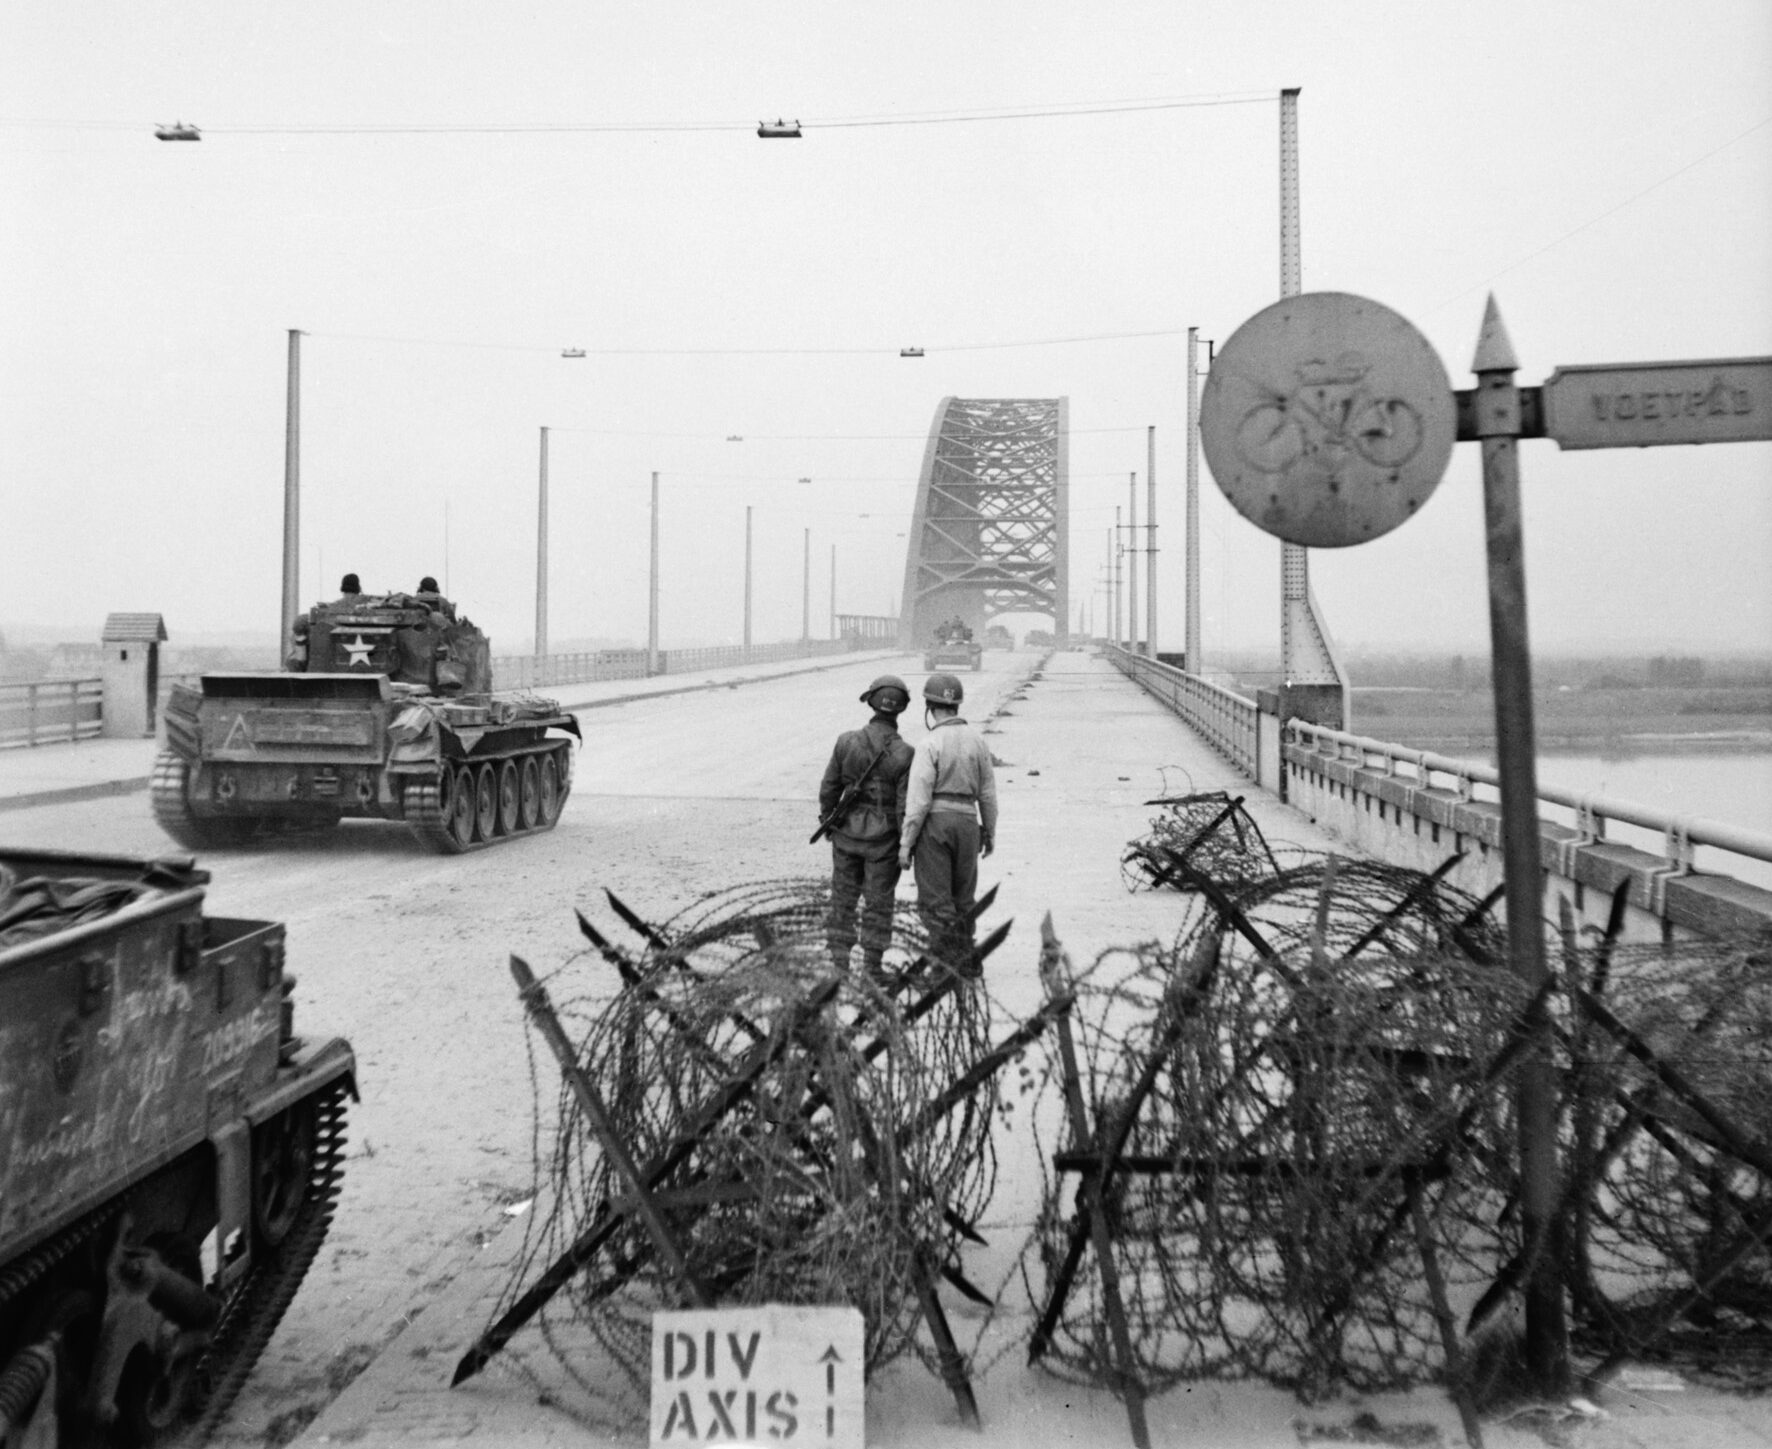 In this photo taken September 21, 1944, tanks of the 2nd Welsh Guards roll across the River Waal at Nijmegen while two soldiers look on.  